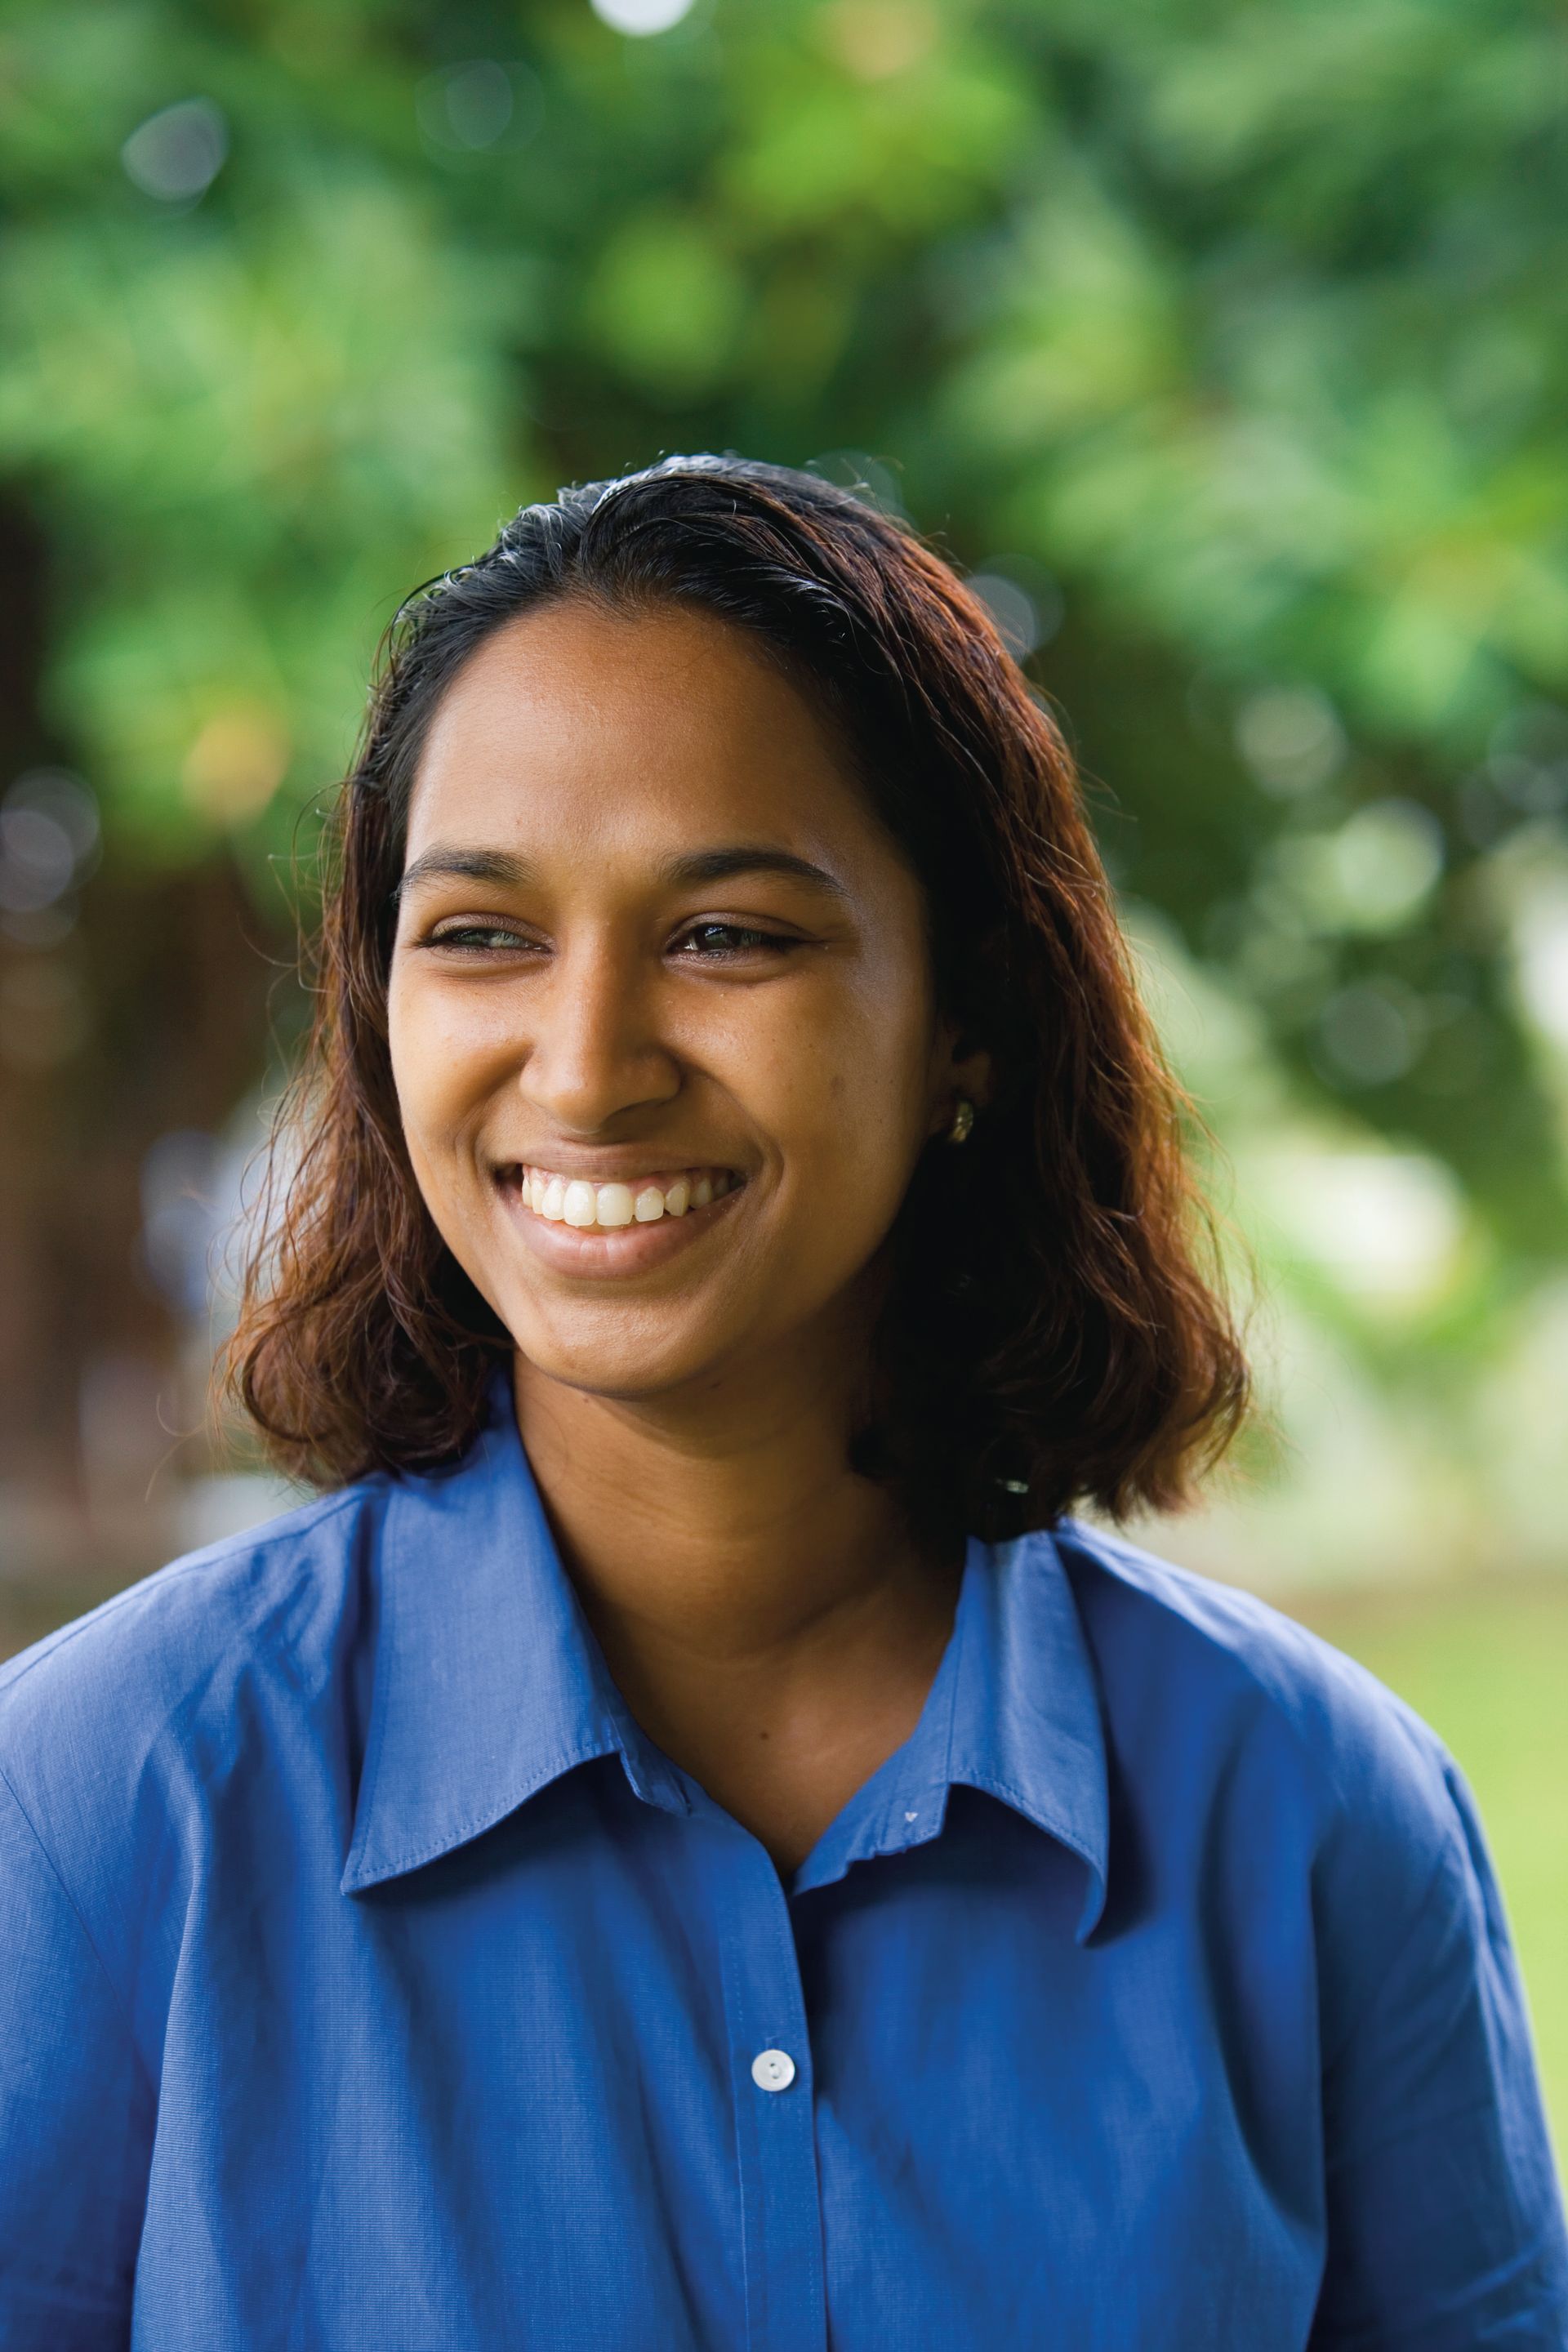 A portrait of a young woman in Fiji smiling.